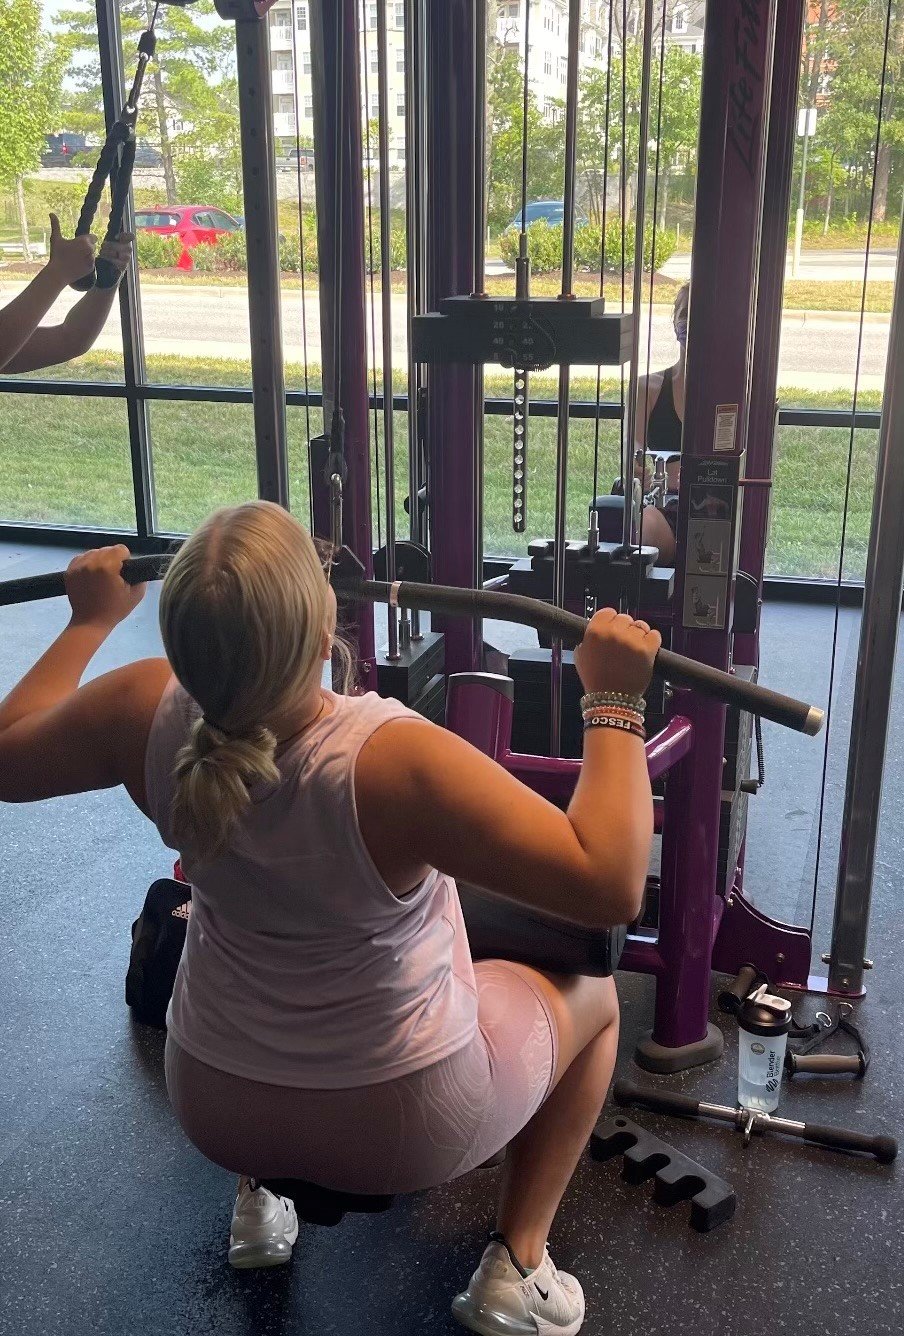 Grayce Haley, a 16-year-old who plays lacrosse at Northeast High School, has been using the fitness center three to four times per week.